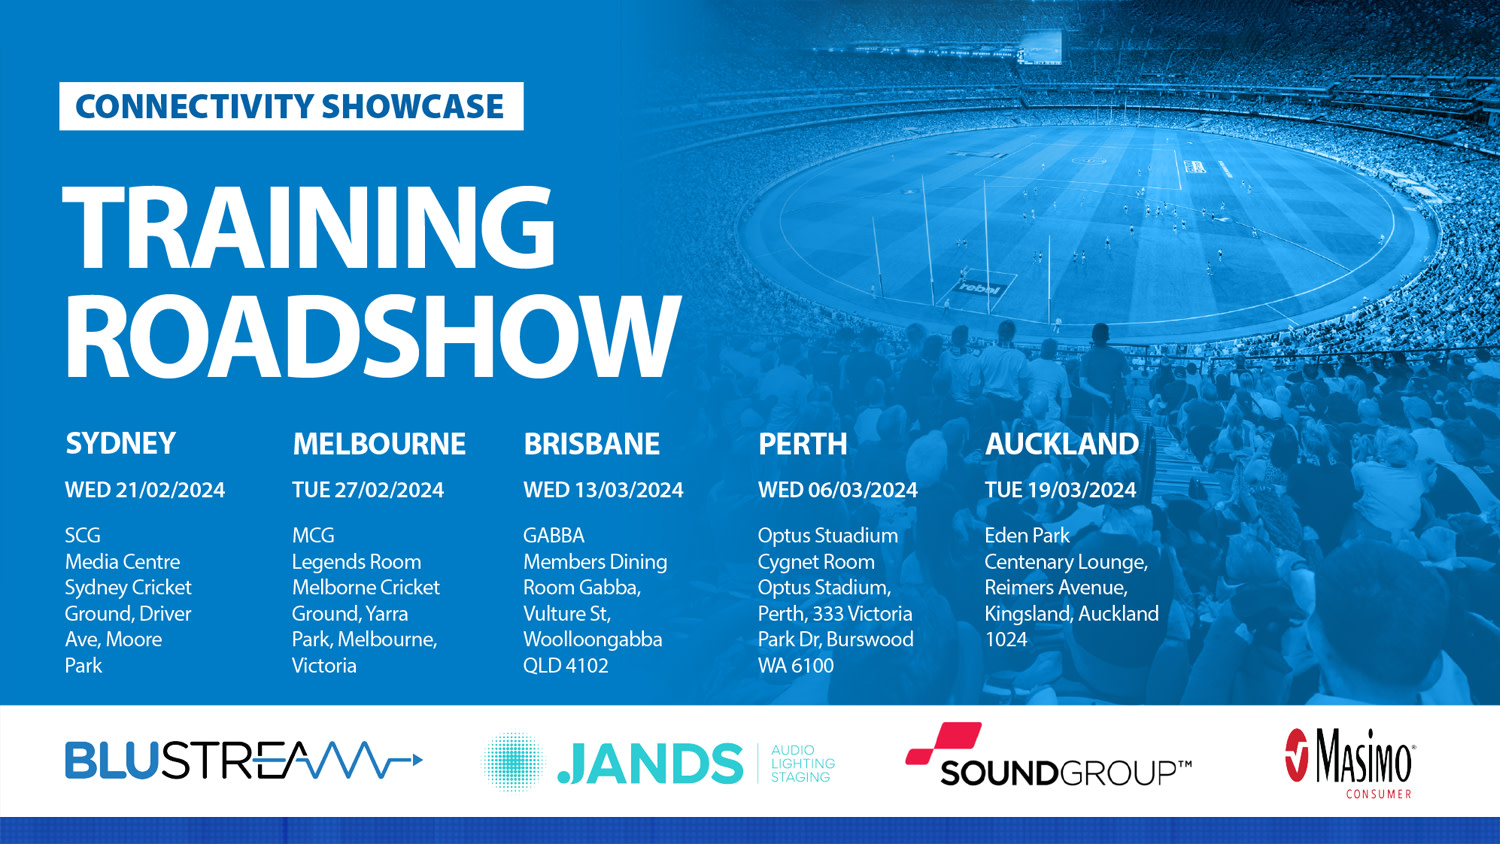 Join one of our Australia / New Zealand training roadshows